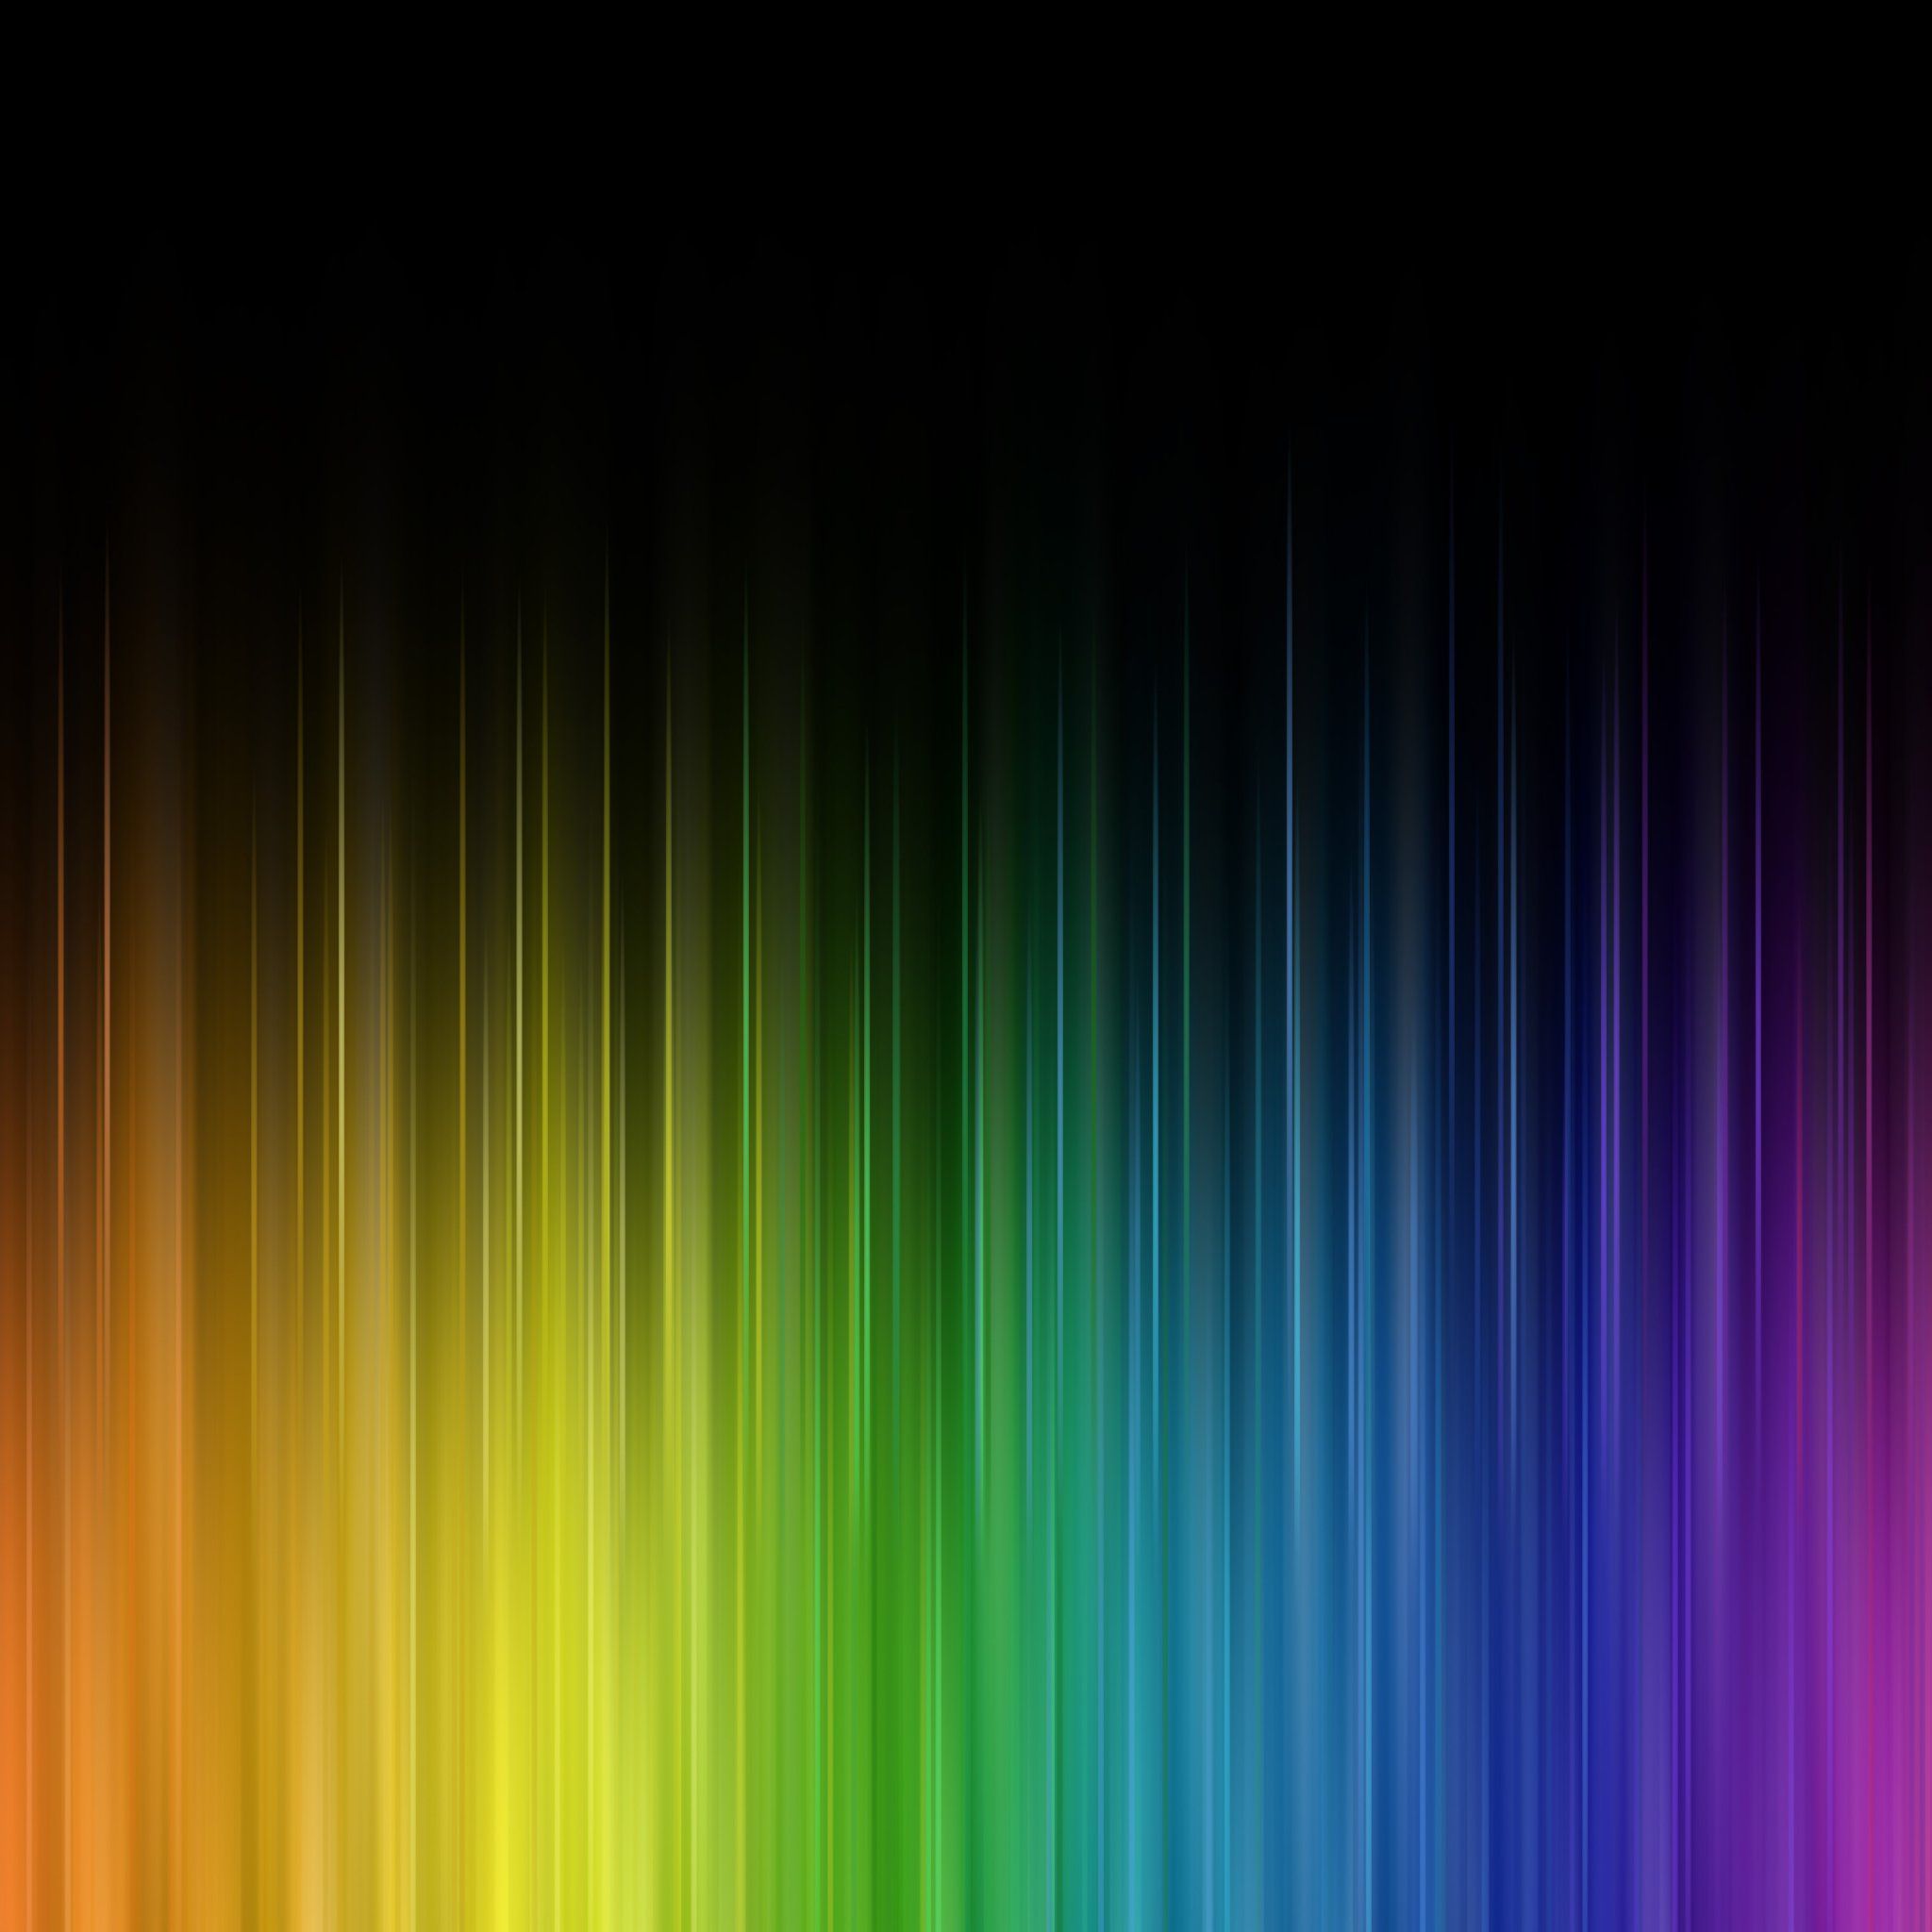 Rainbow Colorful Background iPad Air Wallpaper Free Download